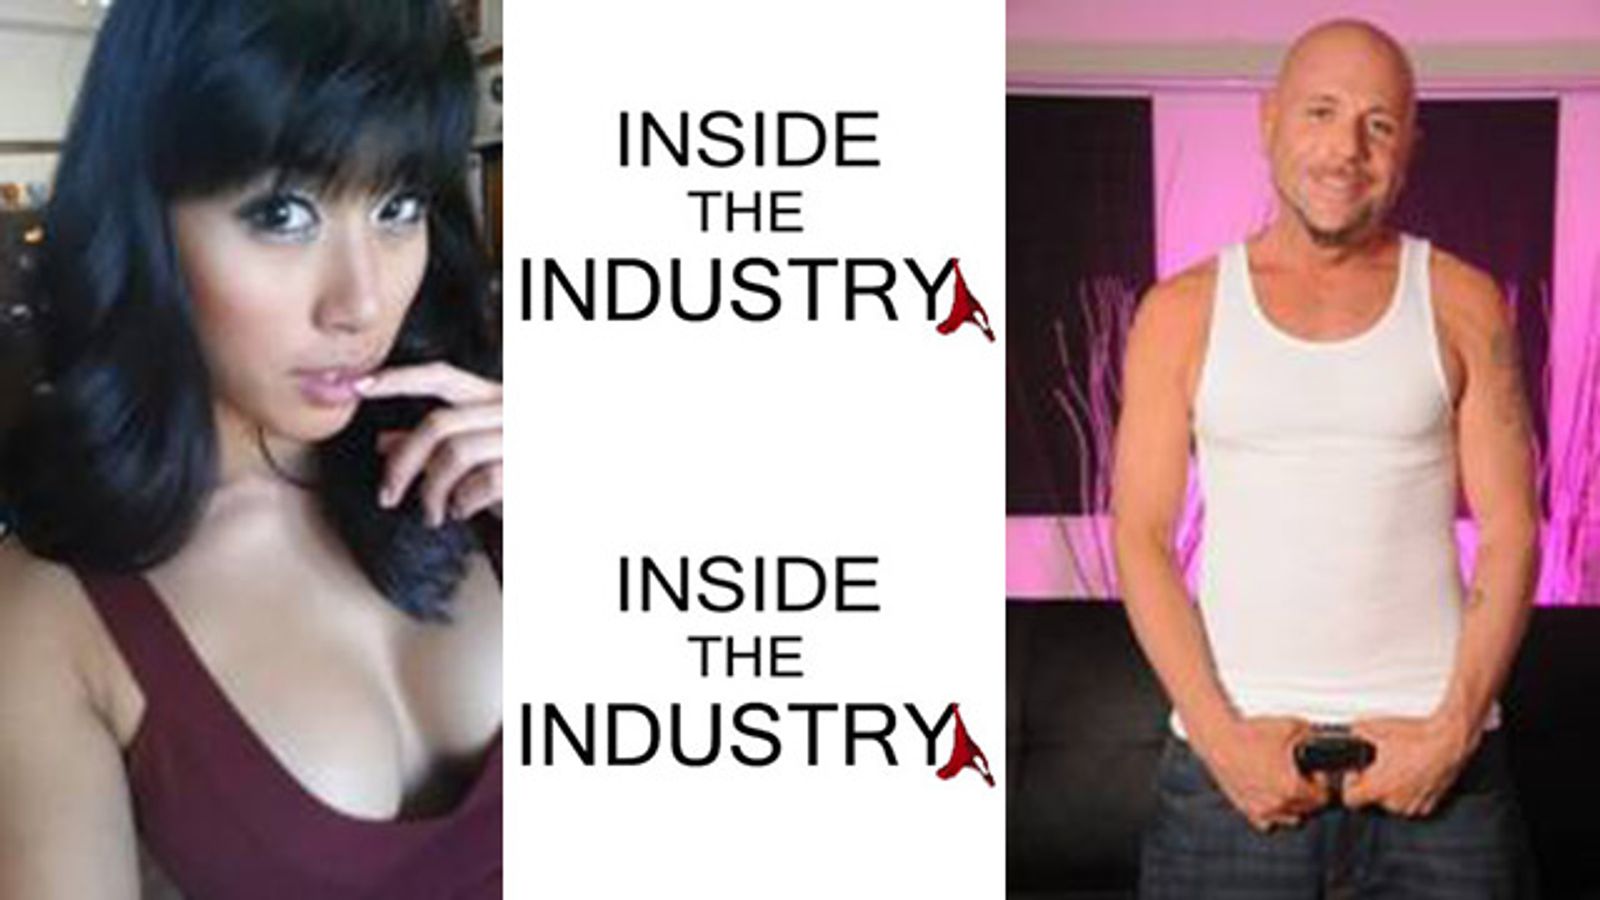 Li and Dominic on Inside The Industry, Wednesday June 4